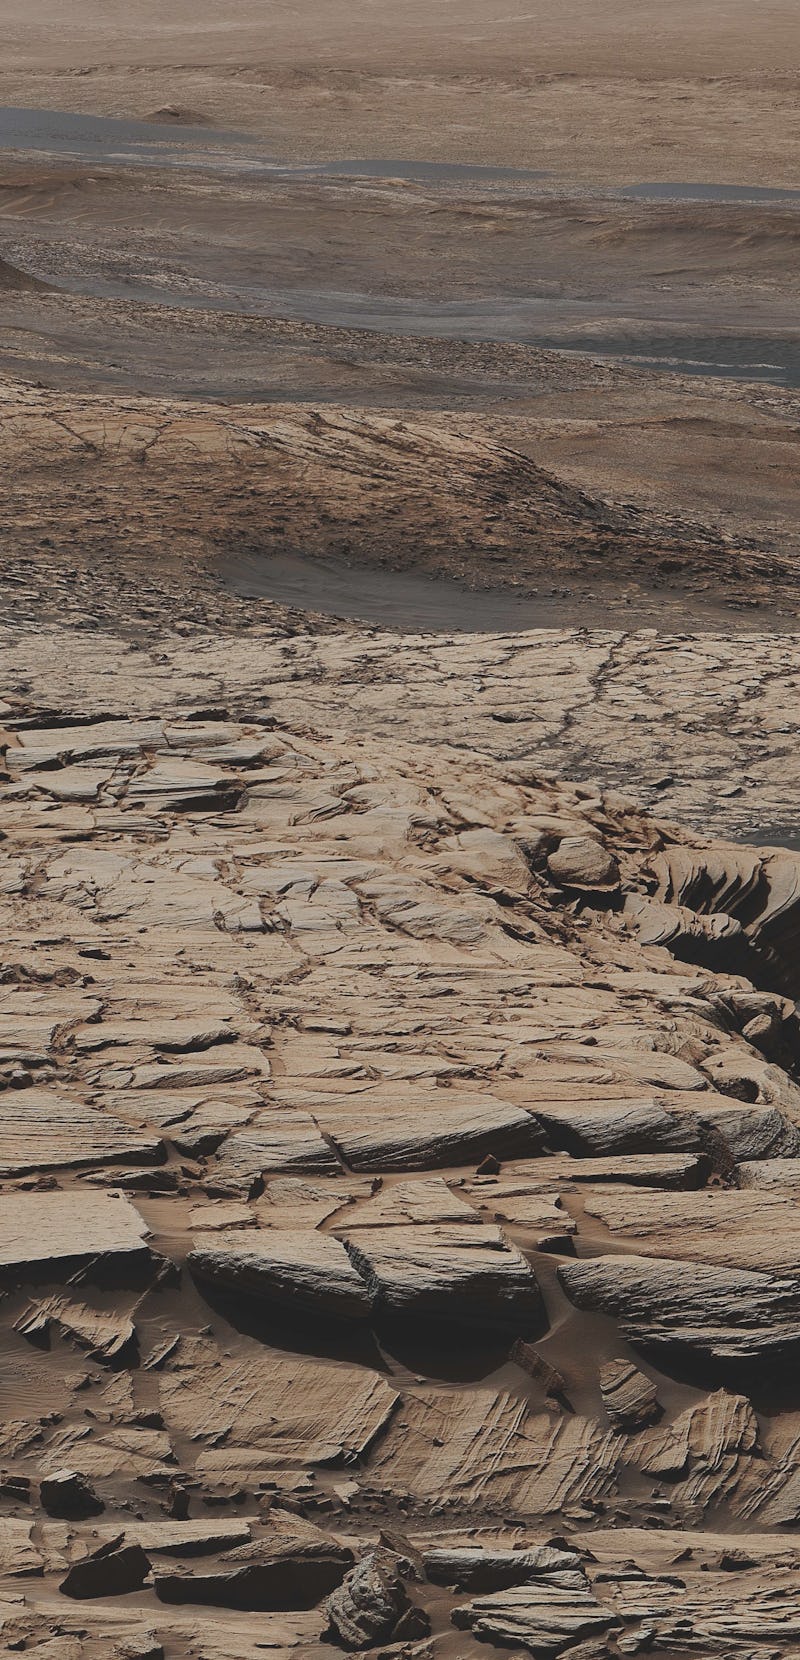 This mosaic was made from images taken by the Mast Camera aboard NASA’s Curiosity rover on the 2,729...